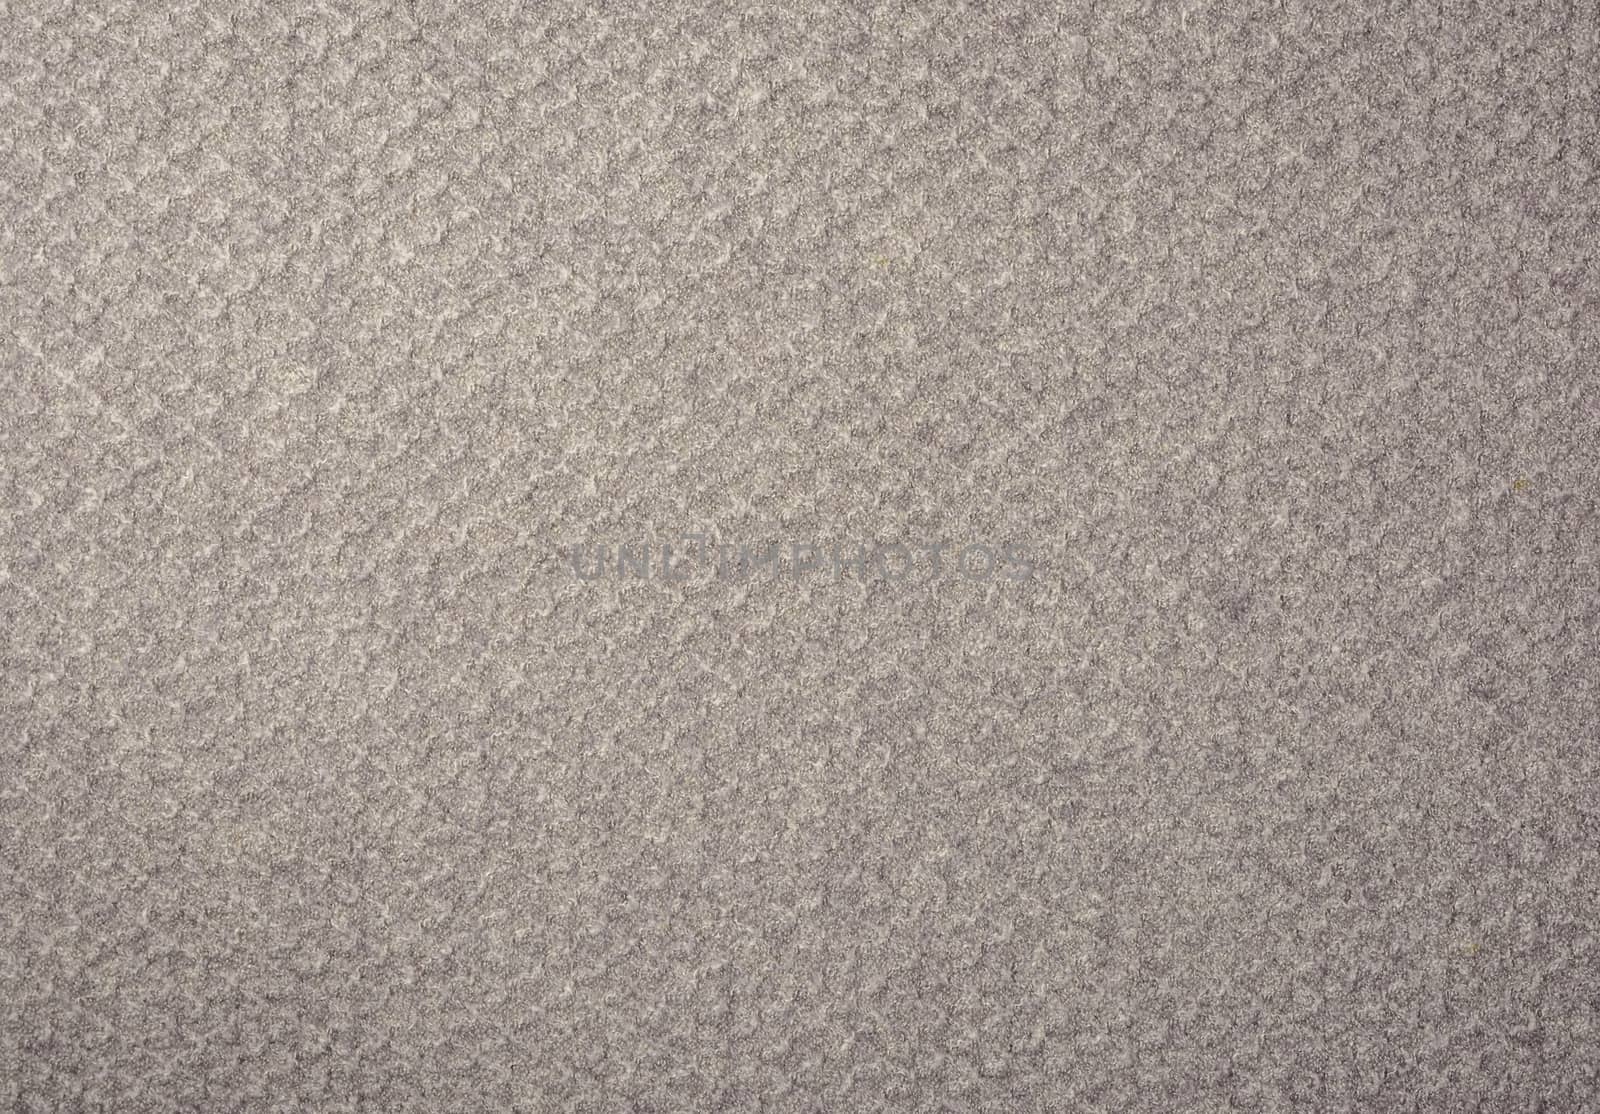 Woolen knitted impressive fabric background . Top view, copy space.